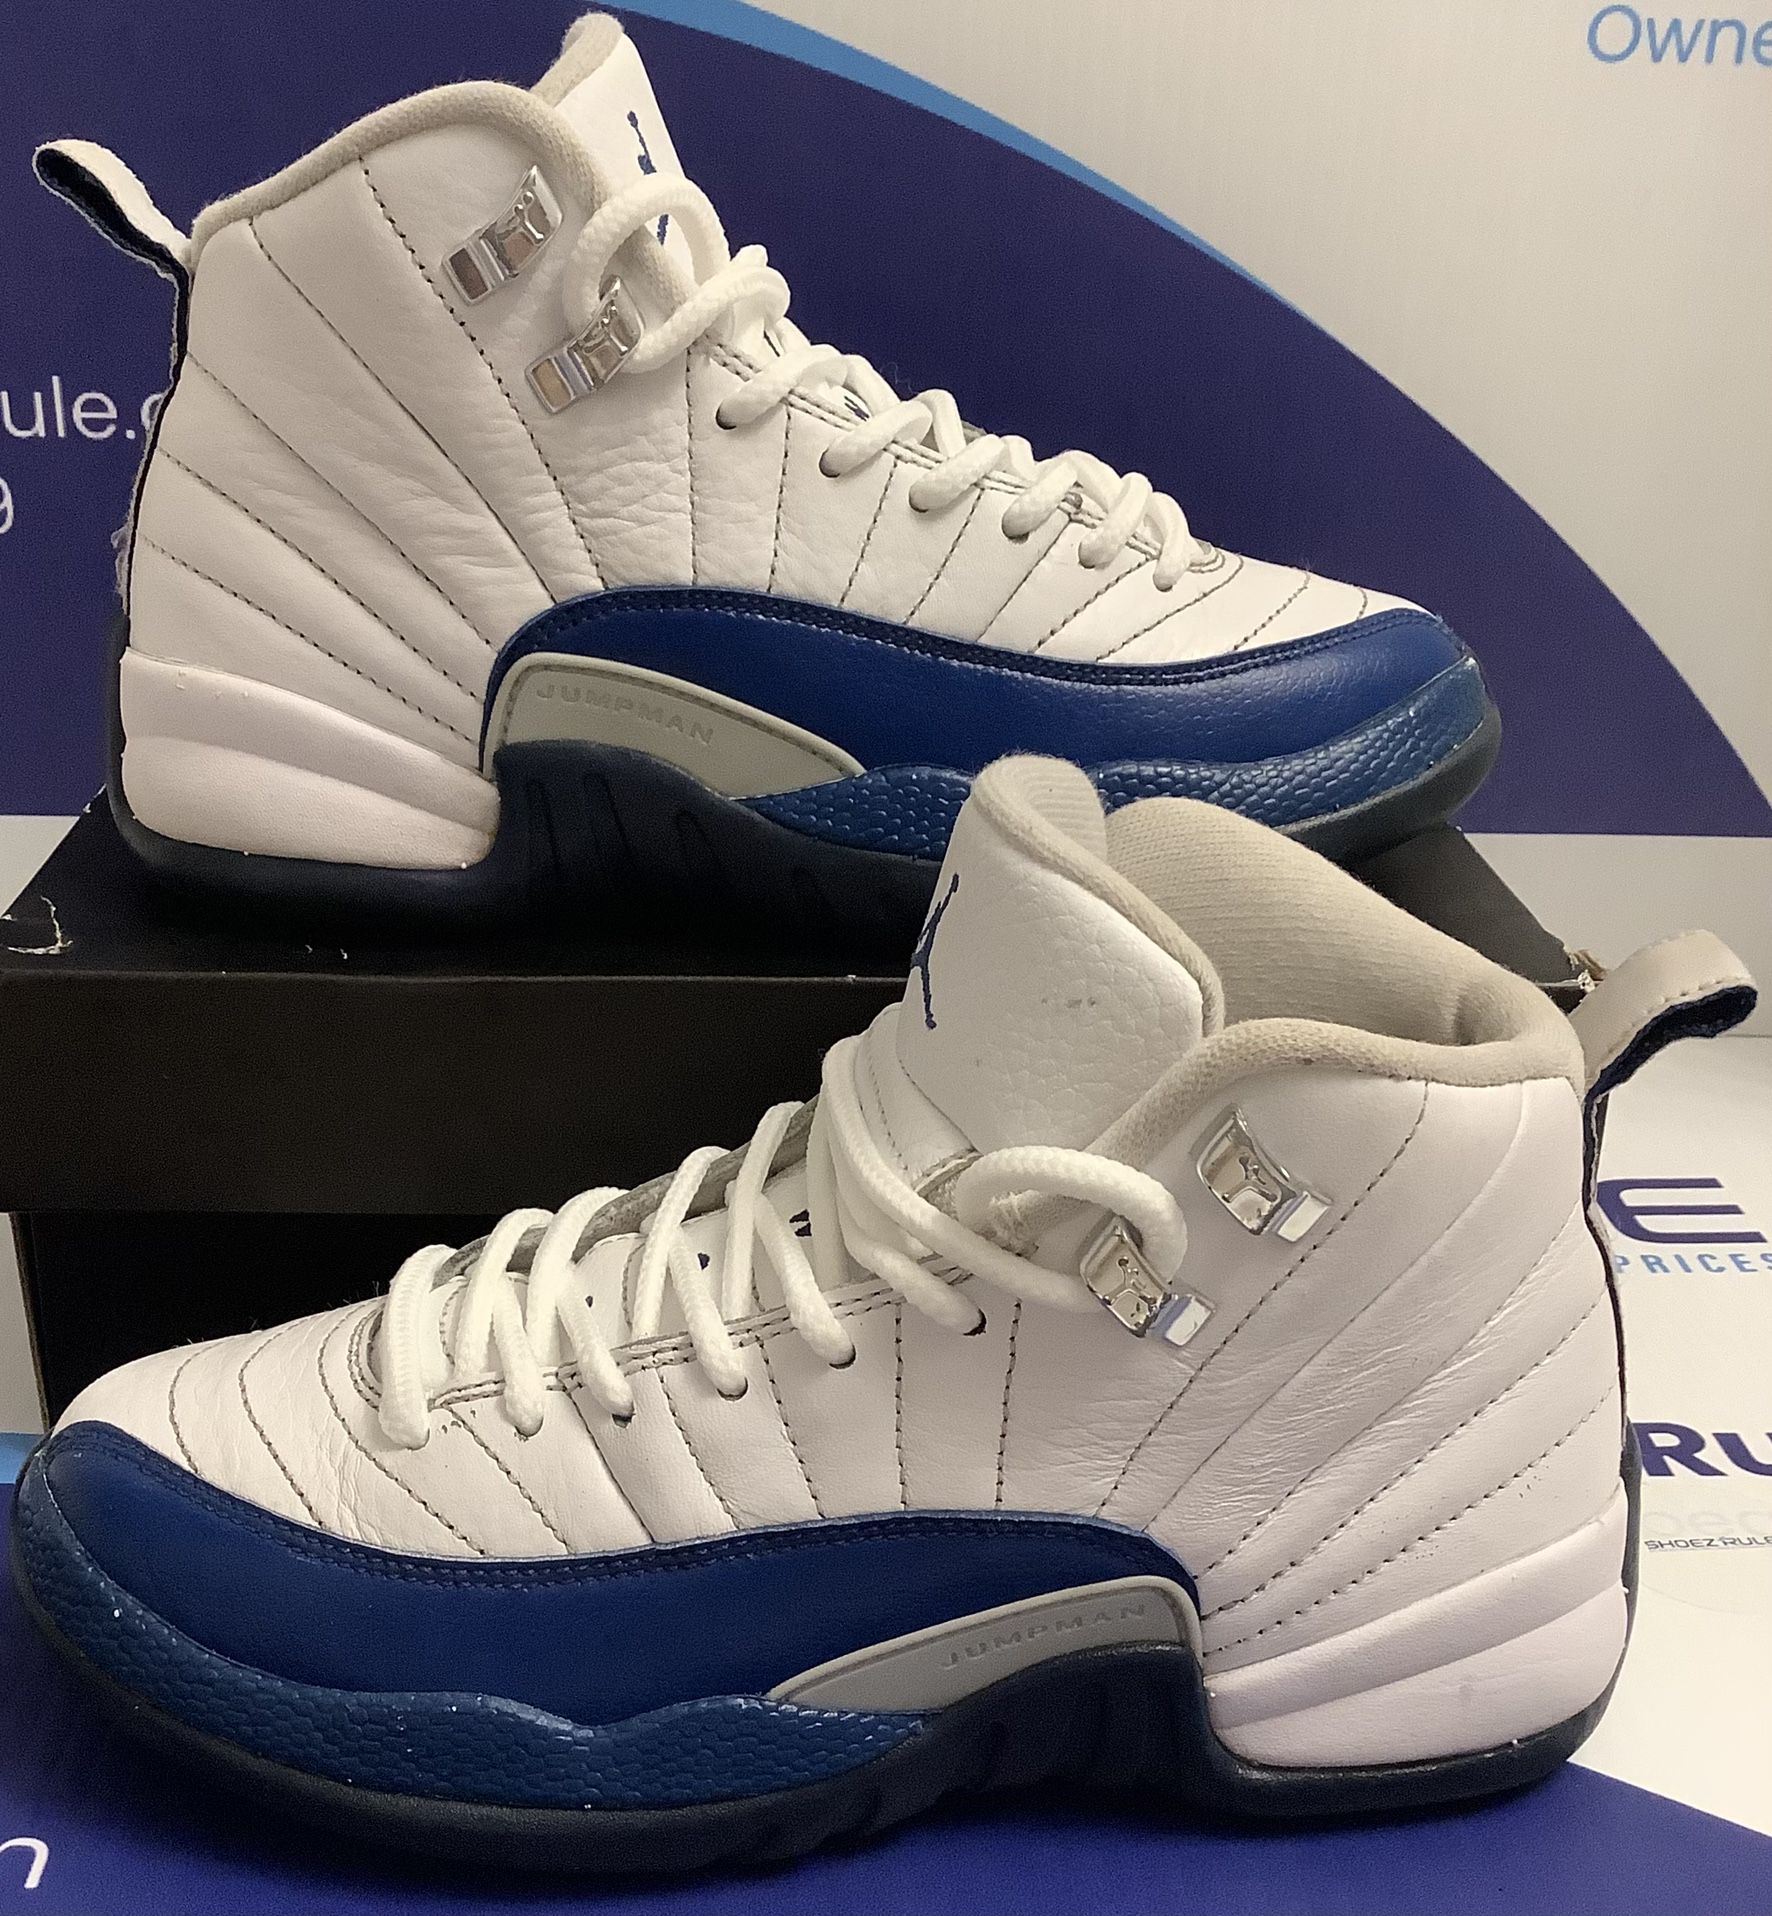 Reconditioned Air Jordan 12 Retro French Blue Kids Size 4y